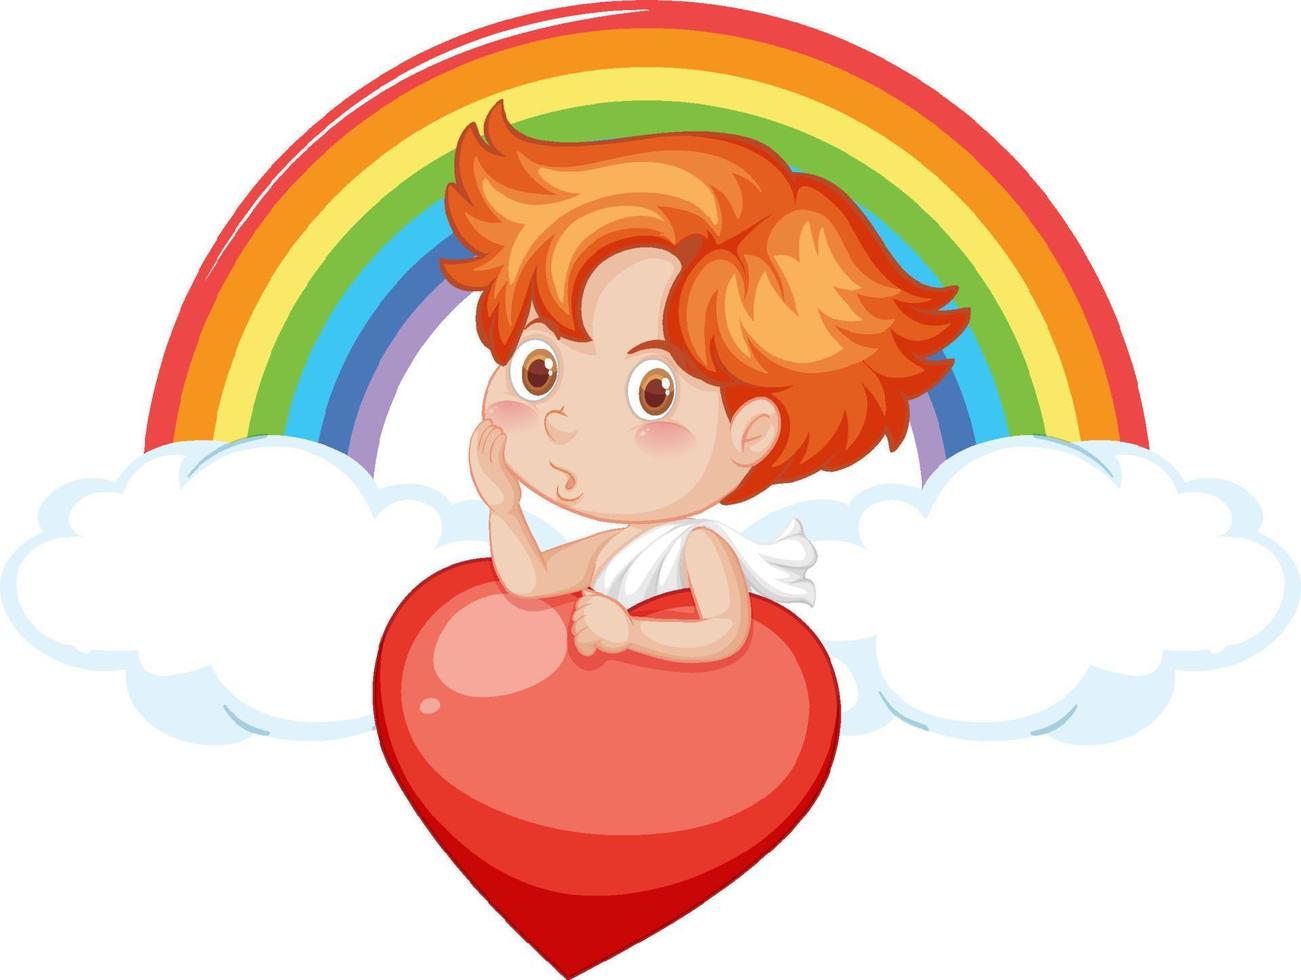 Angel boy holding red heart on rainbow background vector